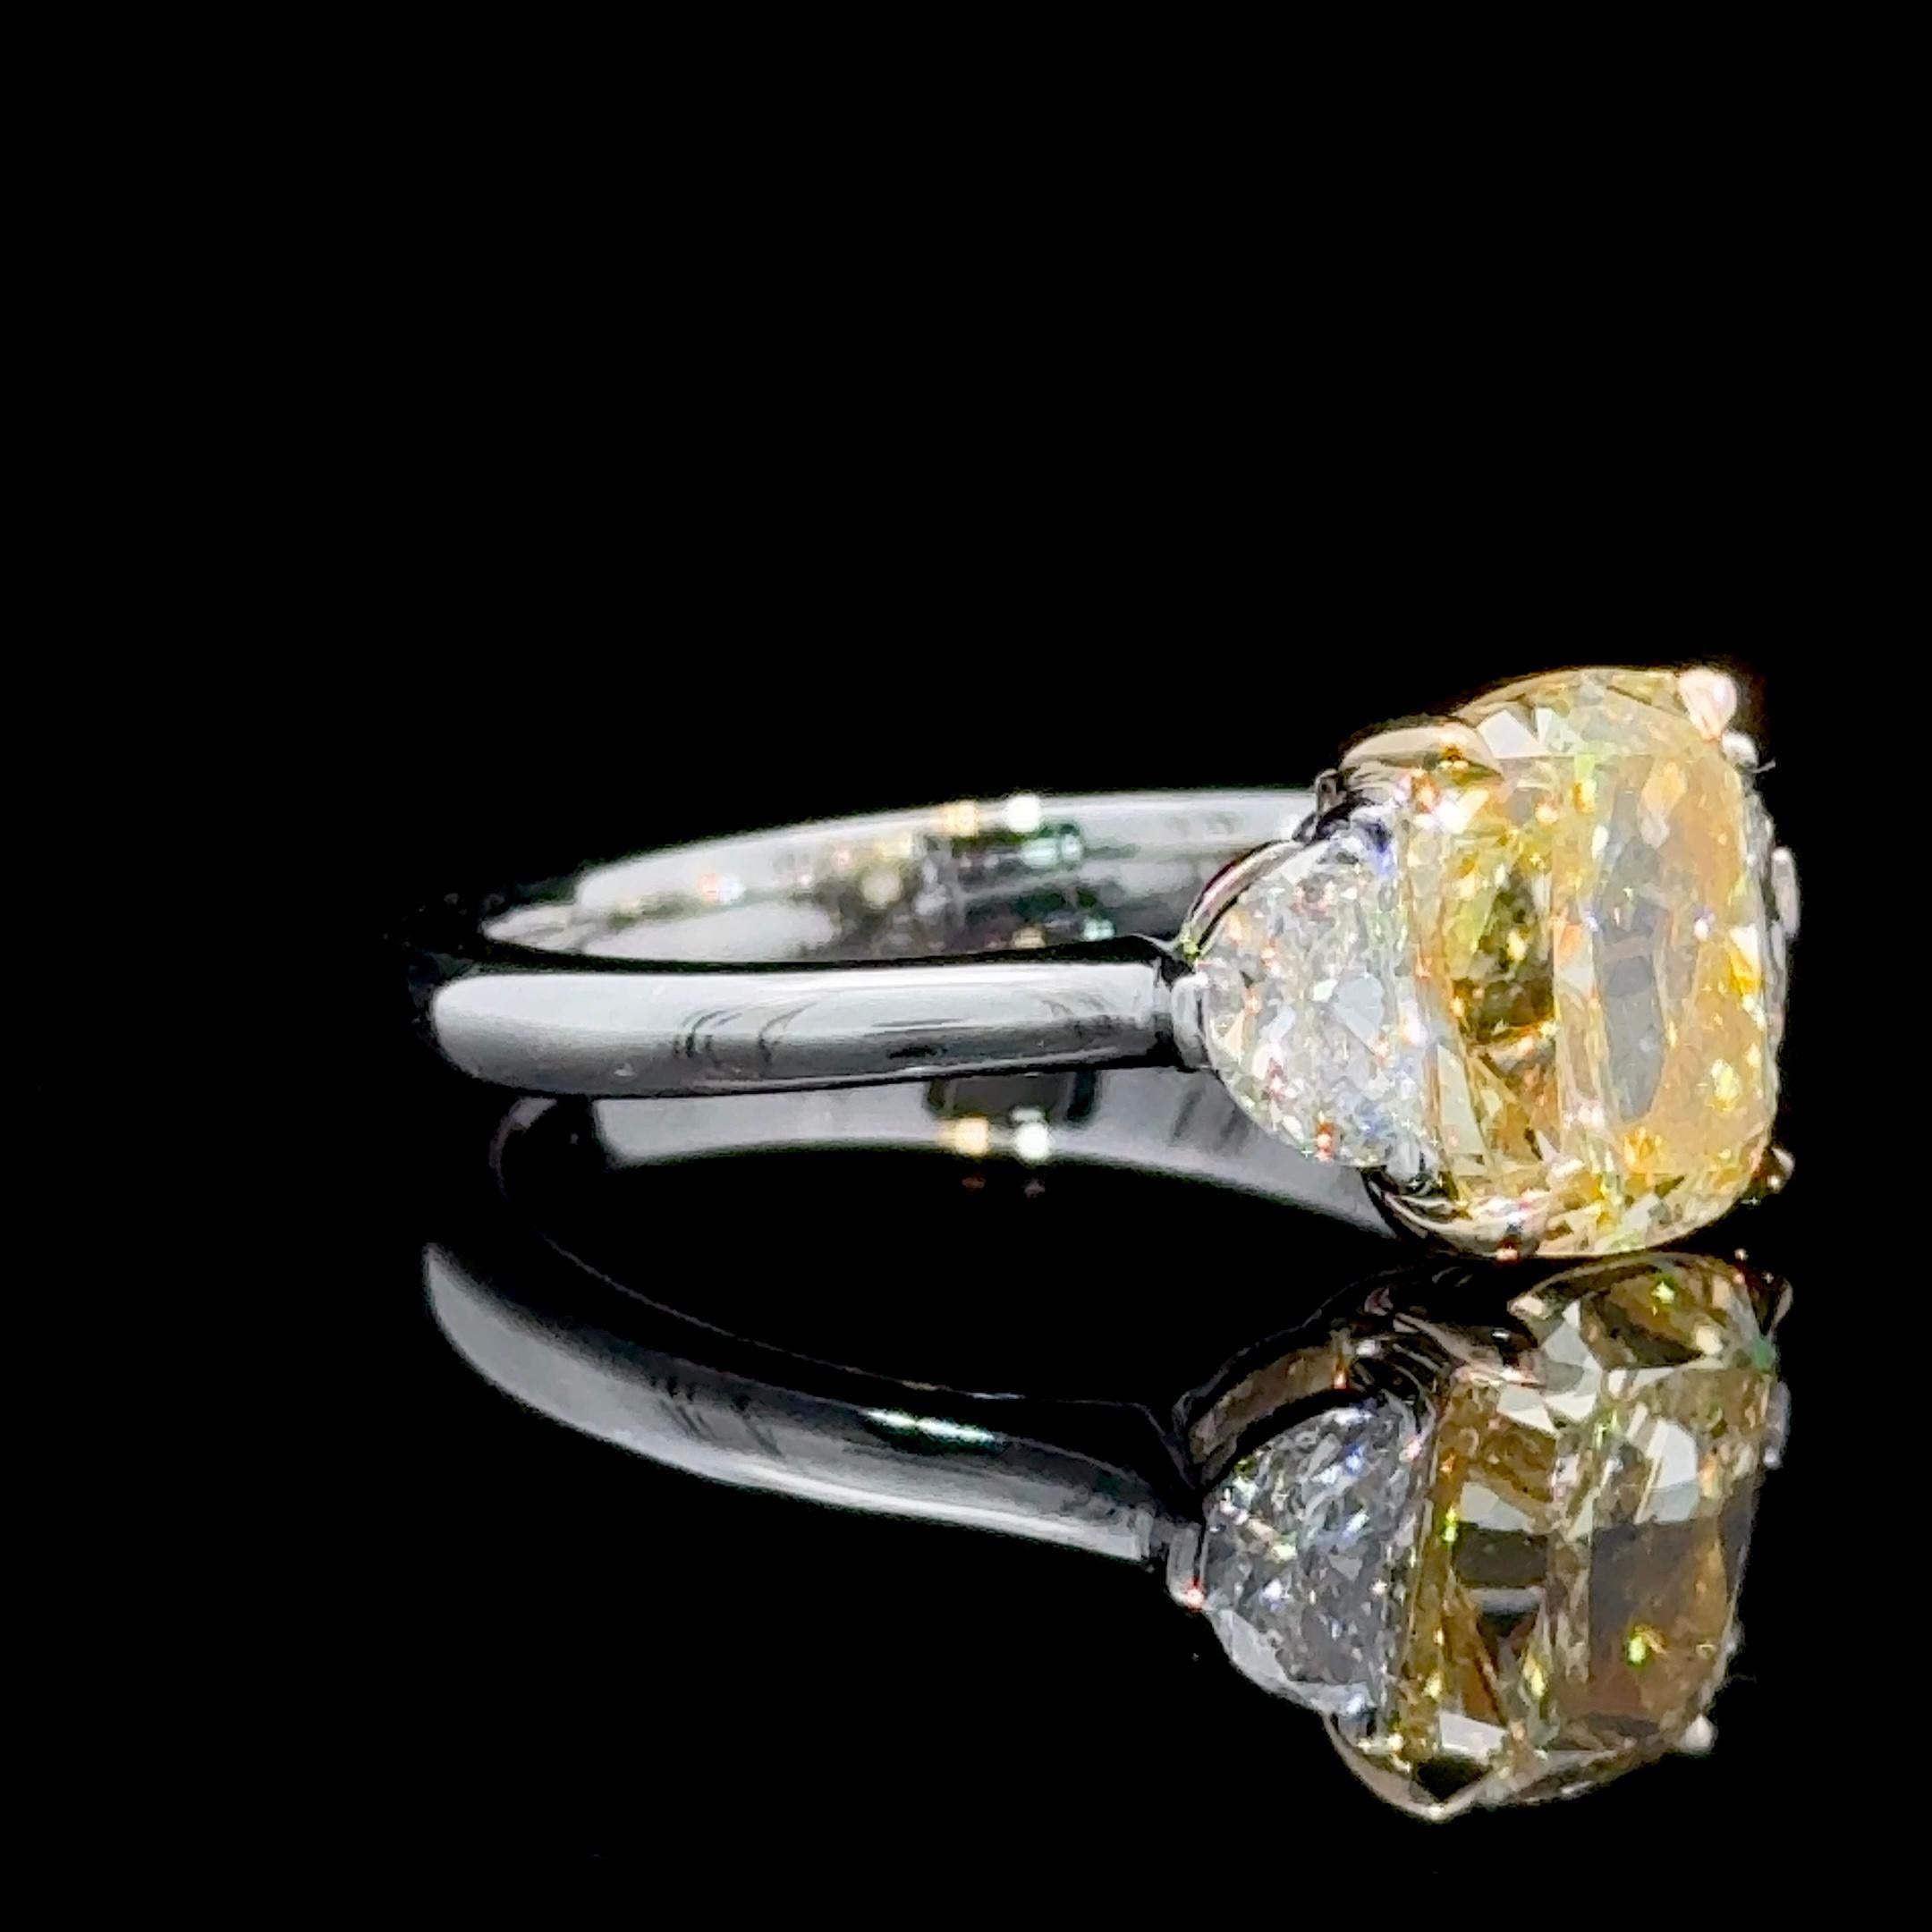 Amongst Yellow Diamonds, Elongated Shapes are the most coveted and desired outlines for Cushion and Radiant Cuts.
They look larger than their weight suggests, and they look like true gems.

A GIA Certified 2.47 Carat Cushion Cut Fancy Yellow Diamond